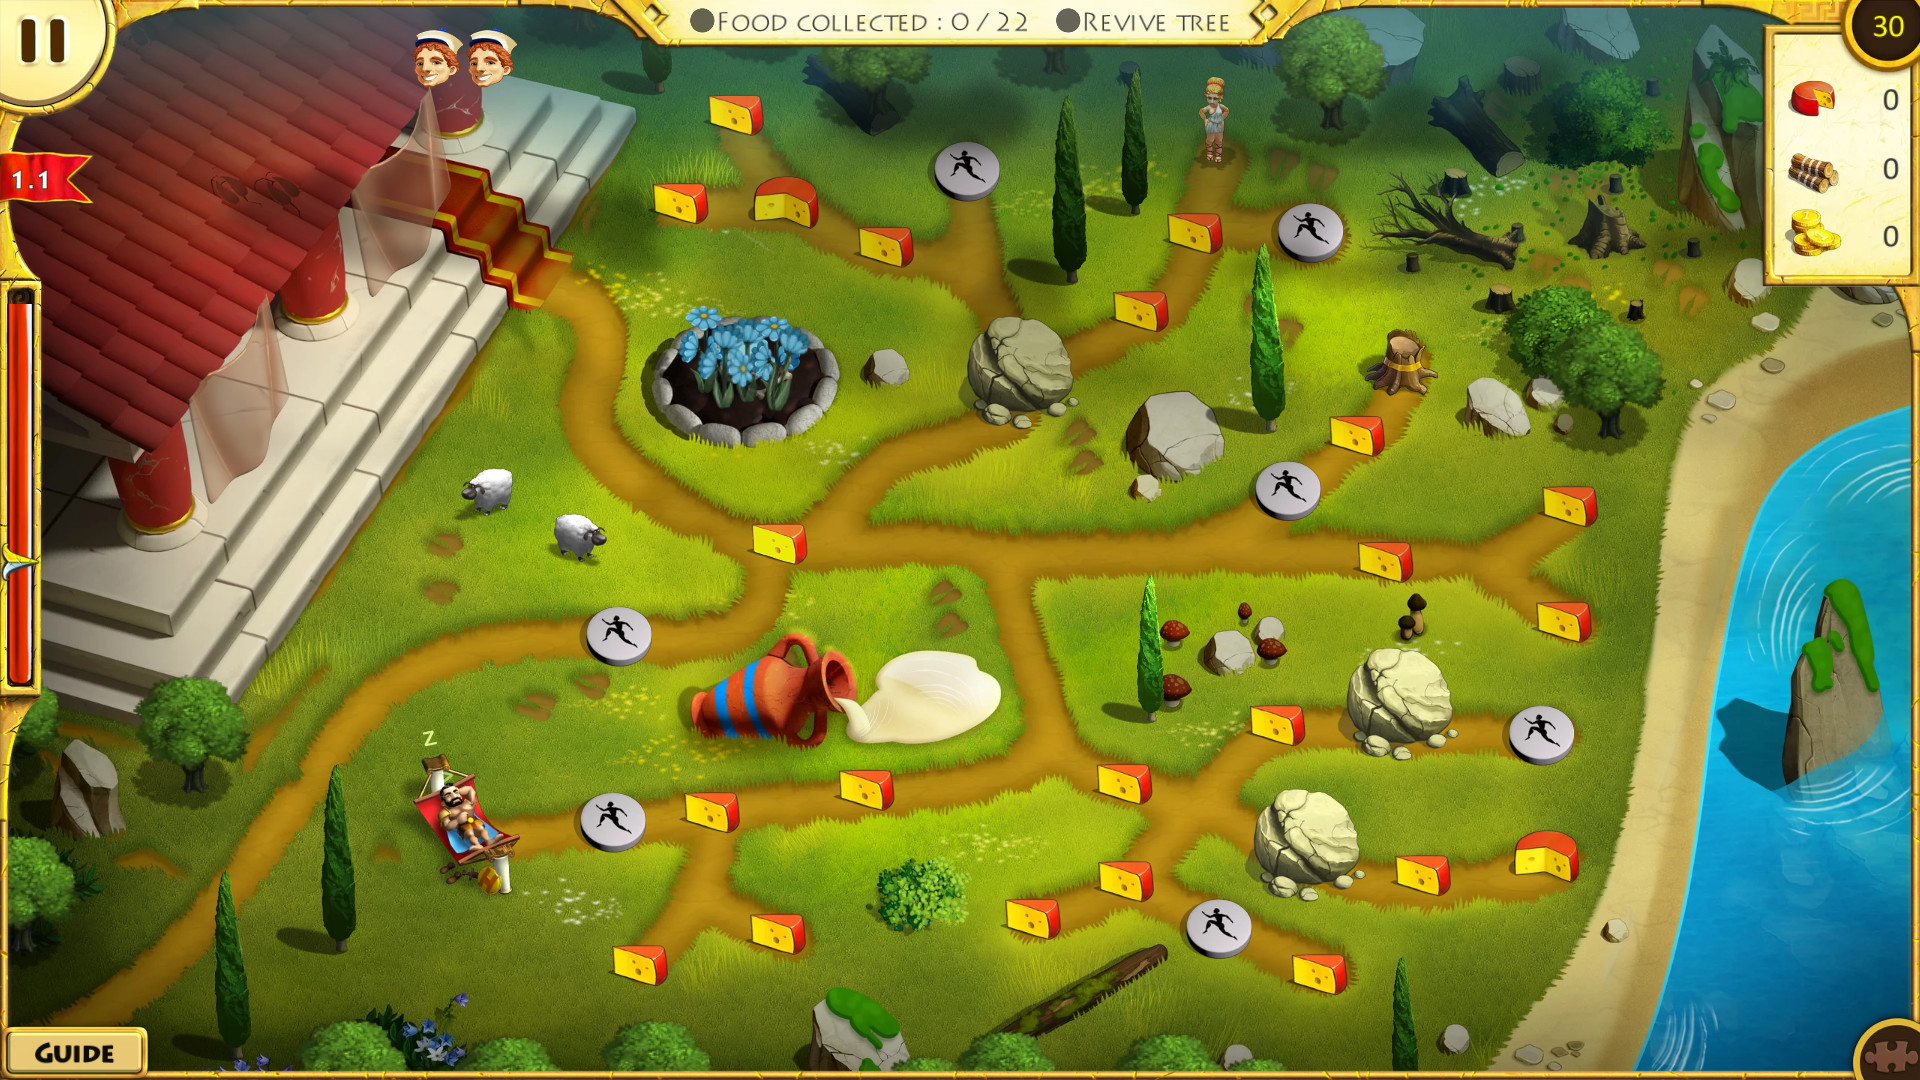 Labours of Hercules x:. The Path of Hercules. Игры 12 2 16